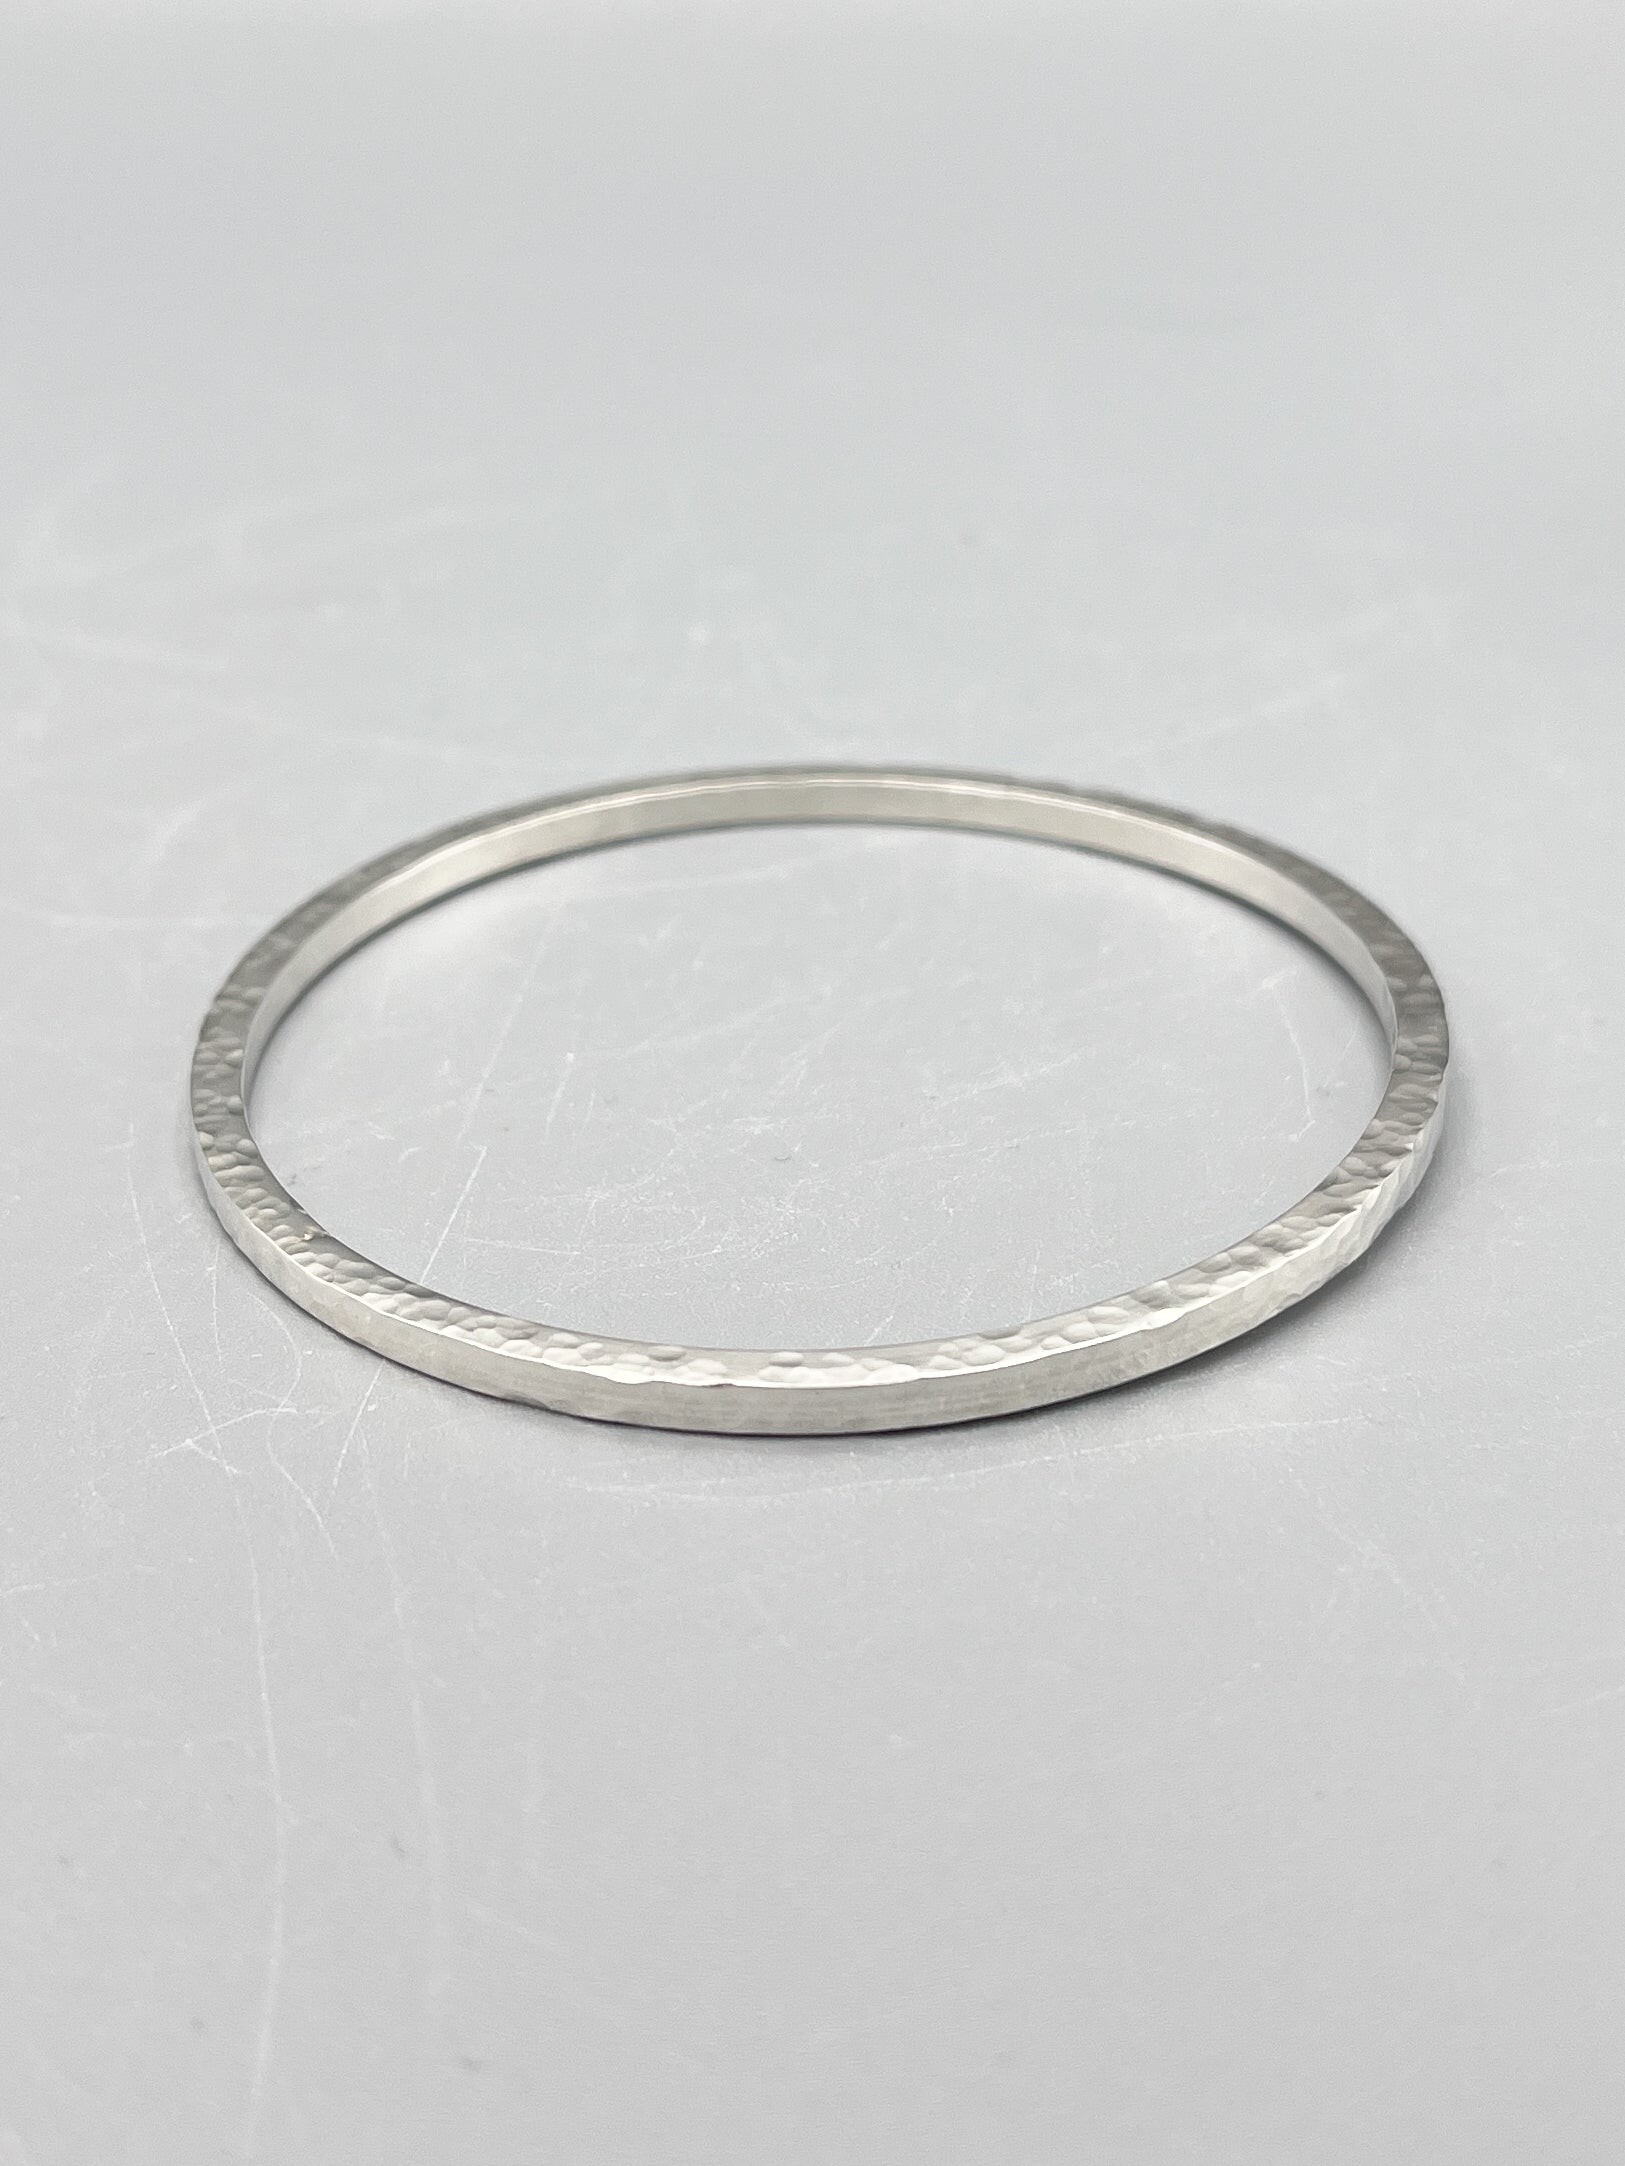 Sterling Silver Bangle, square design with hammered finish